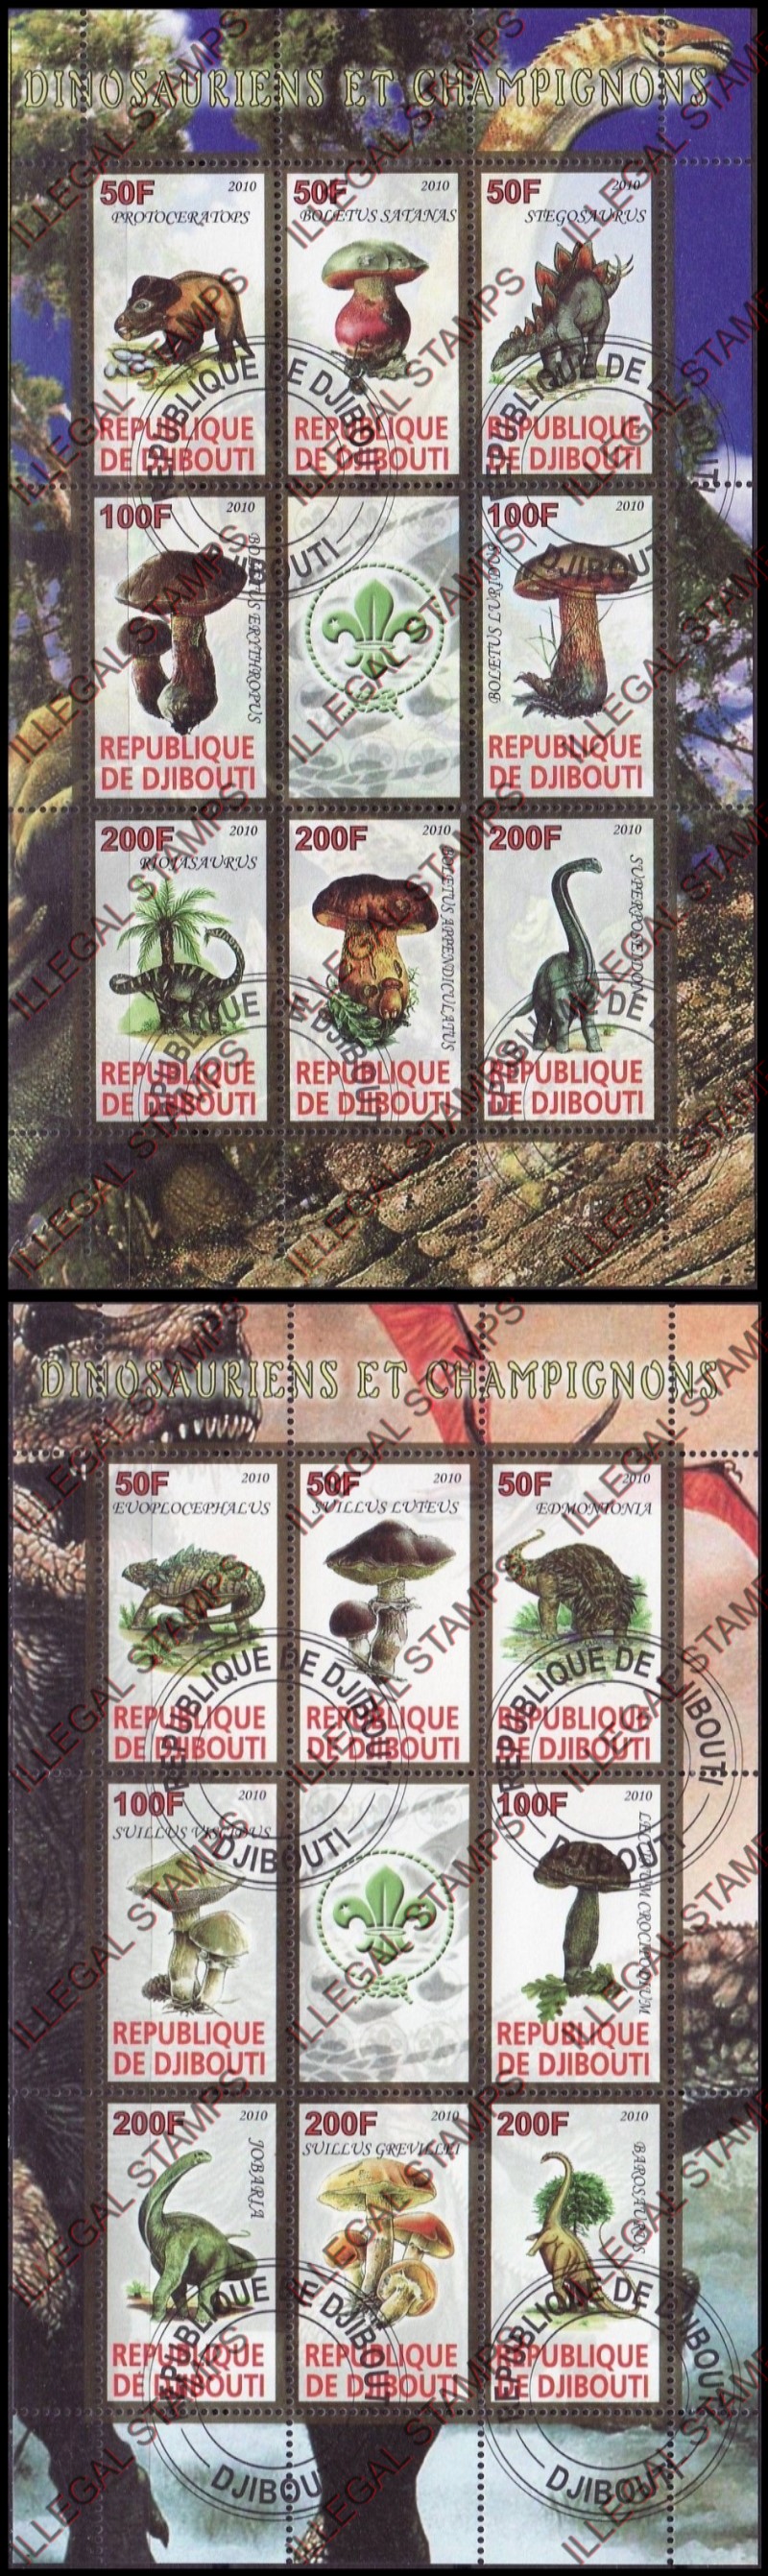 Djibouti 2010 Dinosaurs and Mushrooms Illegal Stamp Sheetlets of 9